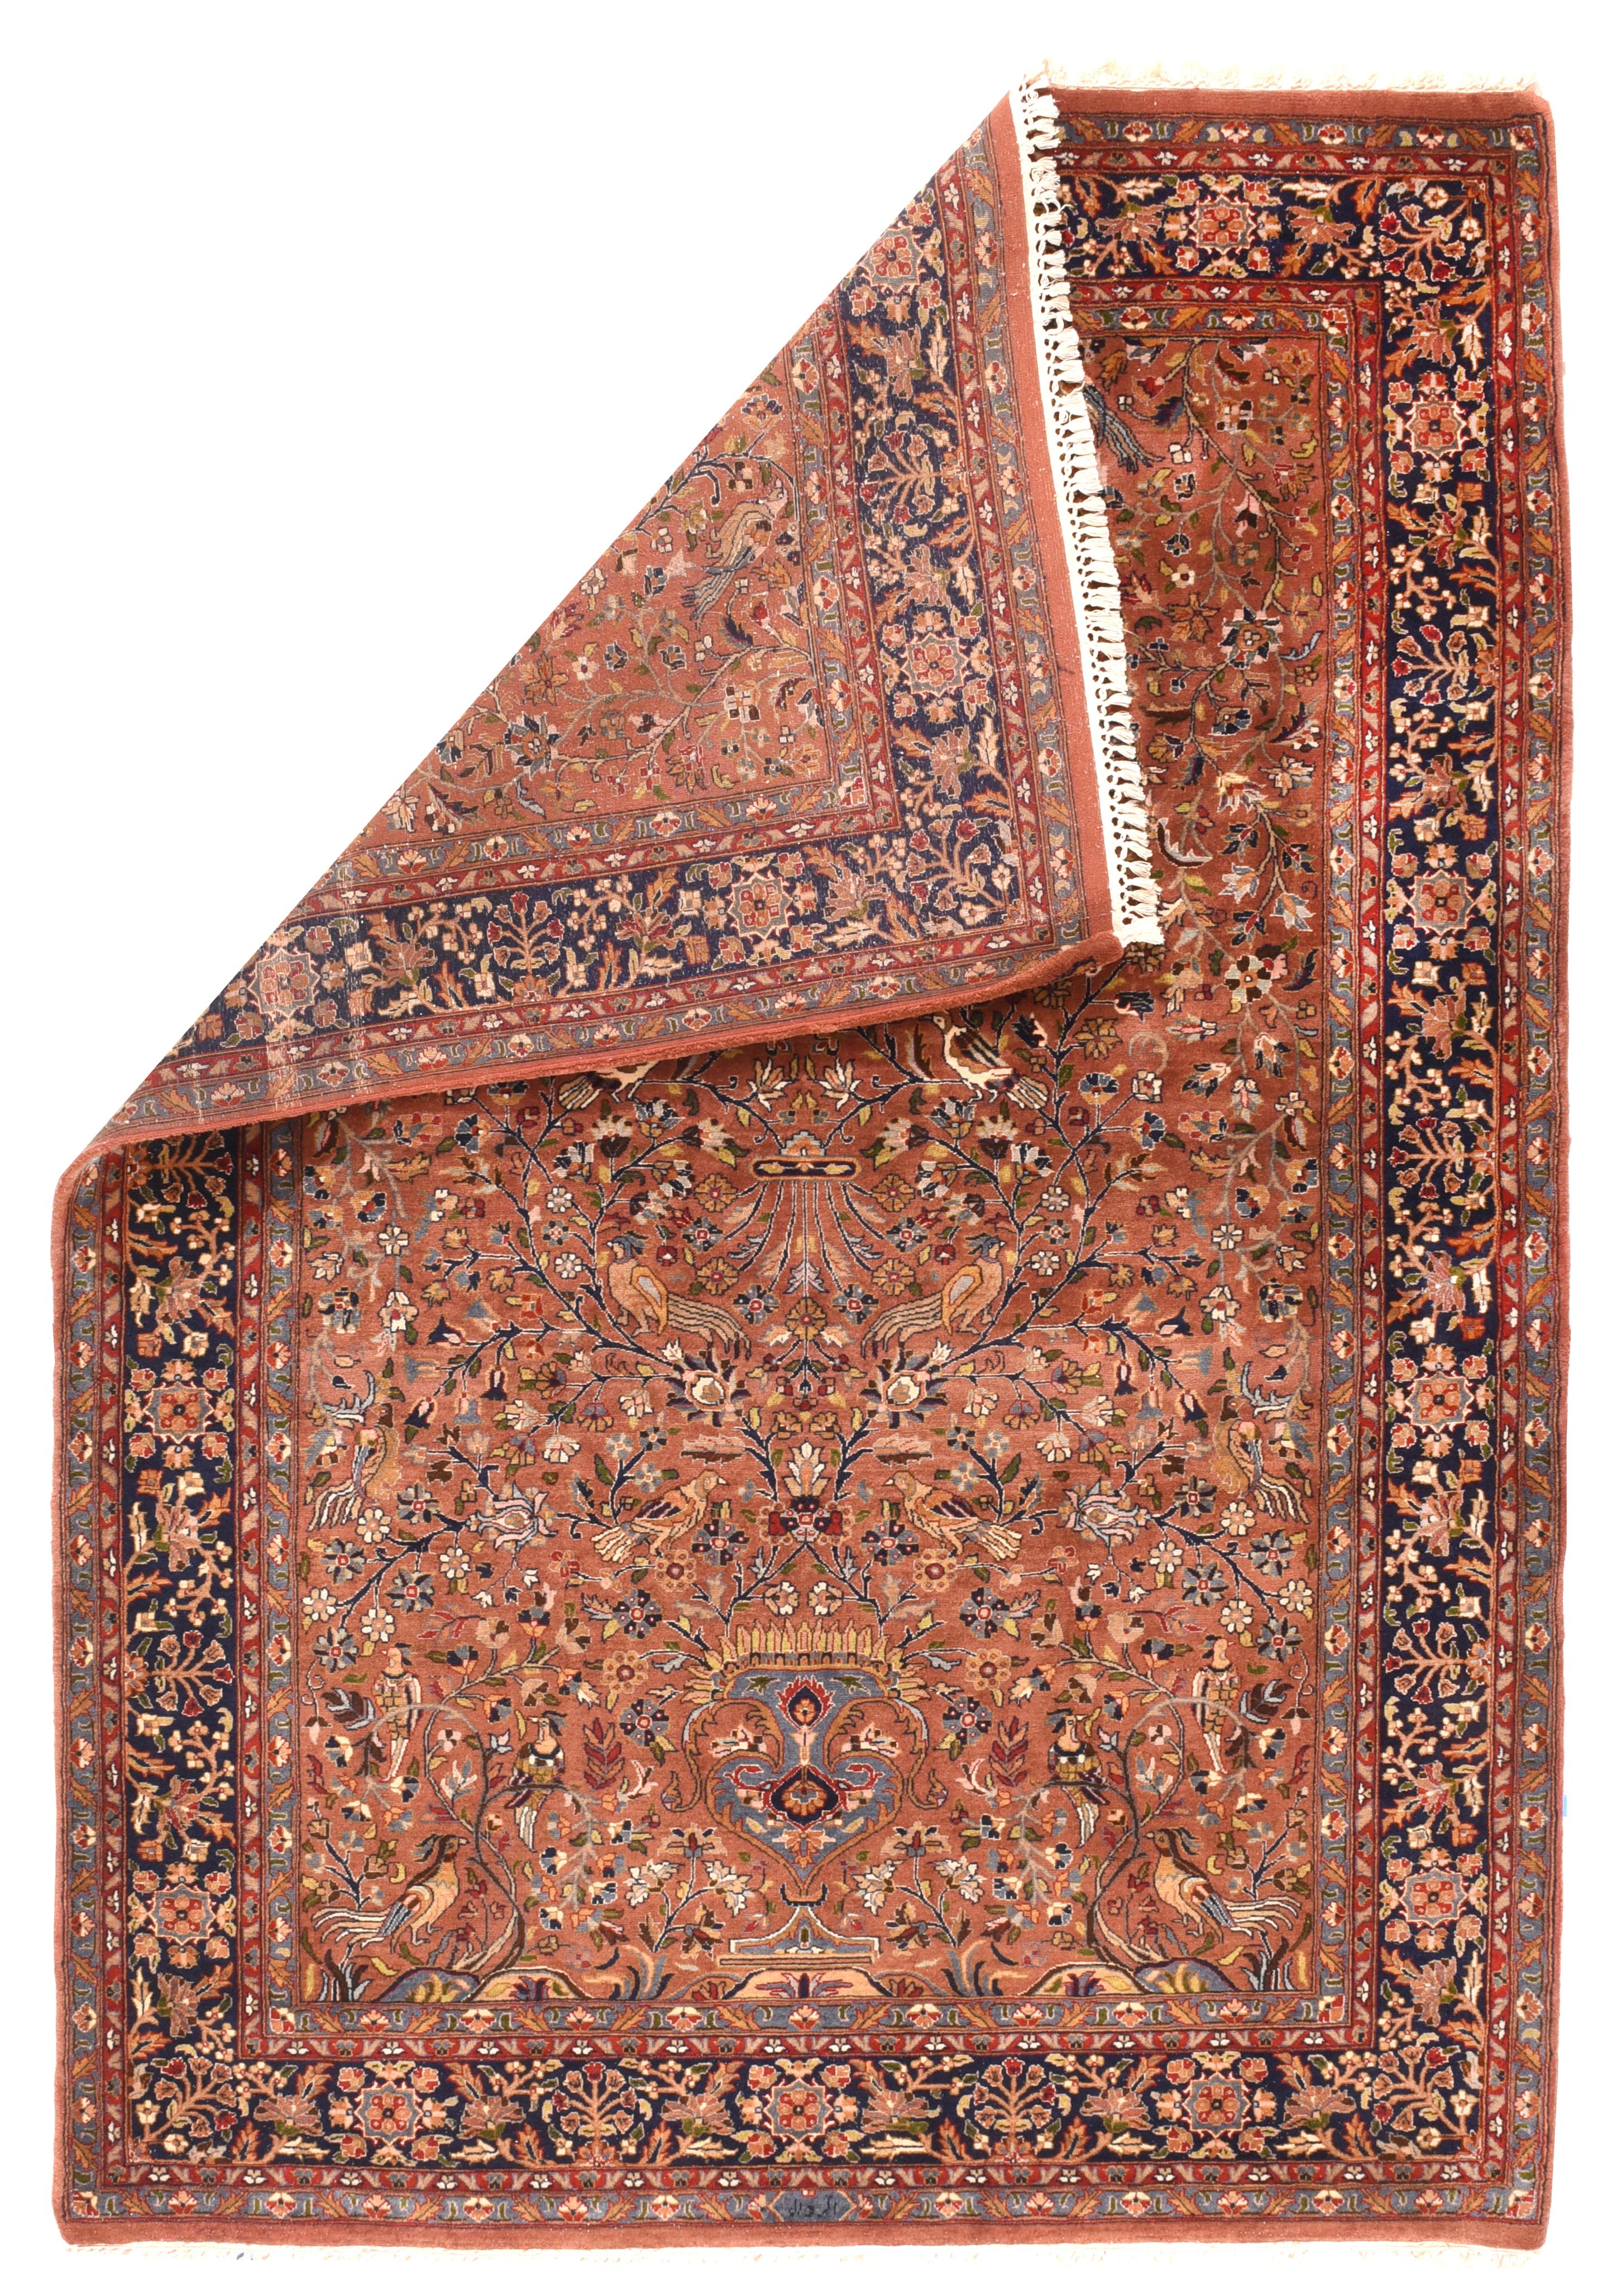 Hand-Knotted Indian Tabriz Rug 5'0